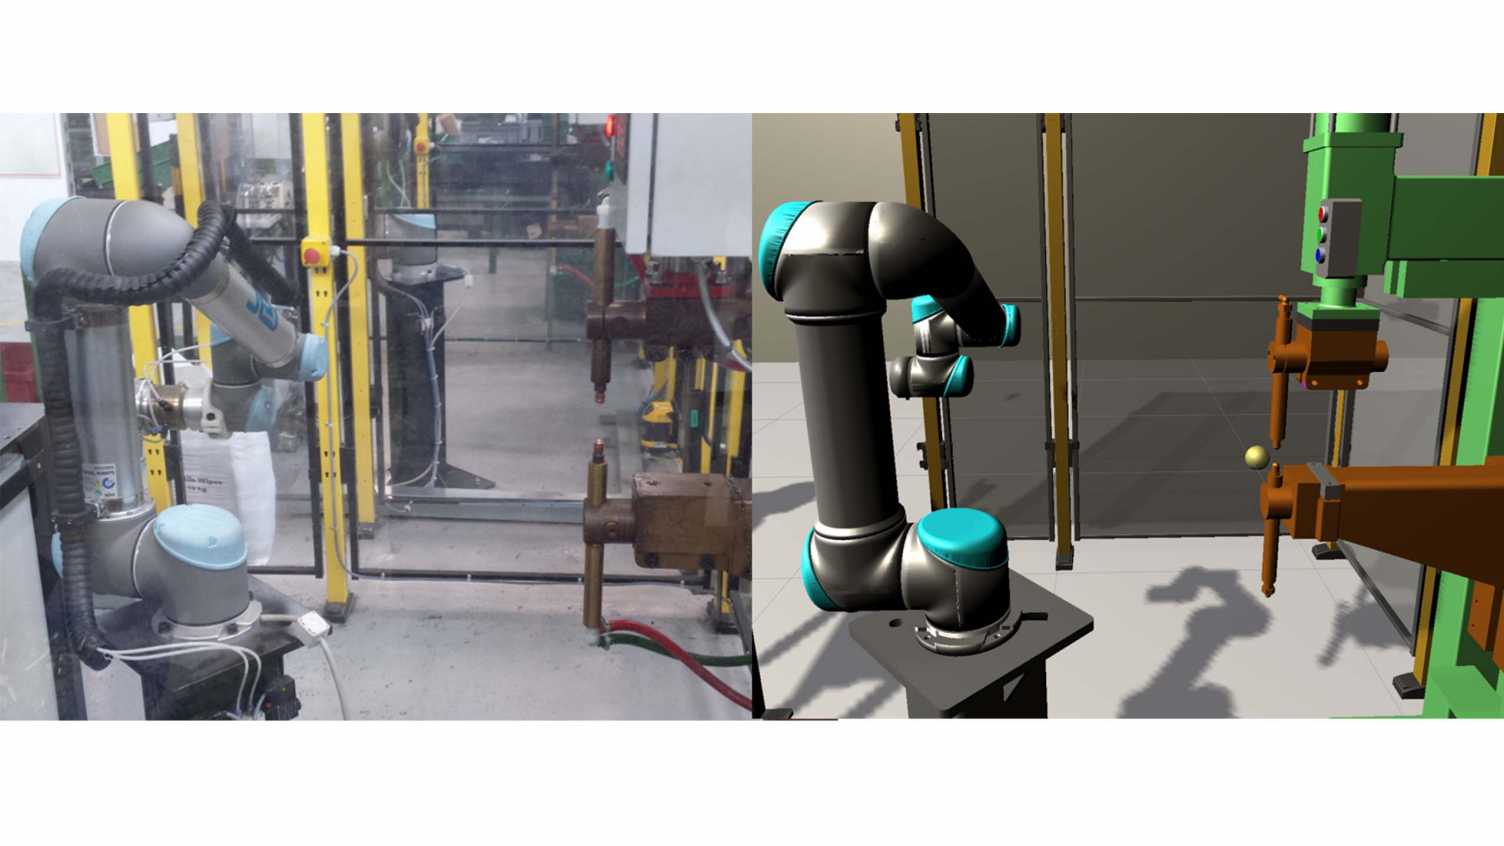 Thumbnail for Using Digital Twins to ensure safety in manufacturing | Faculty of Engineering